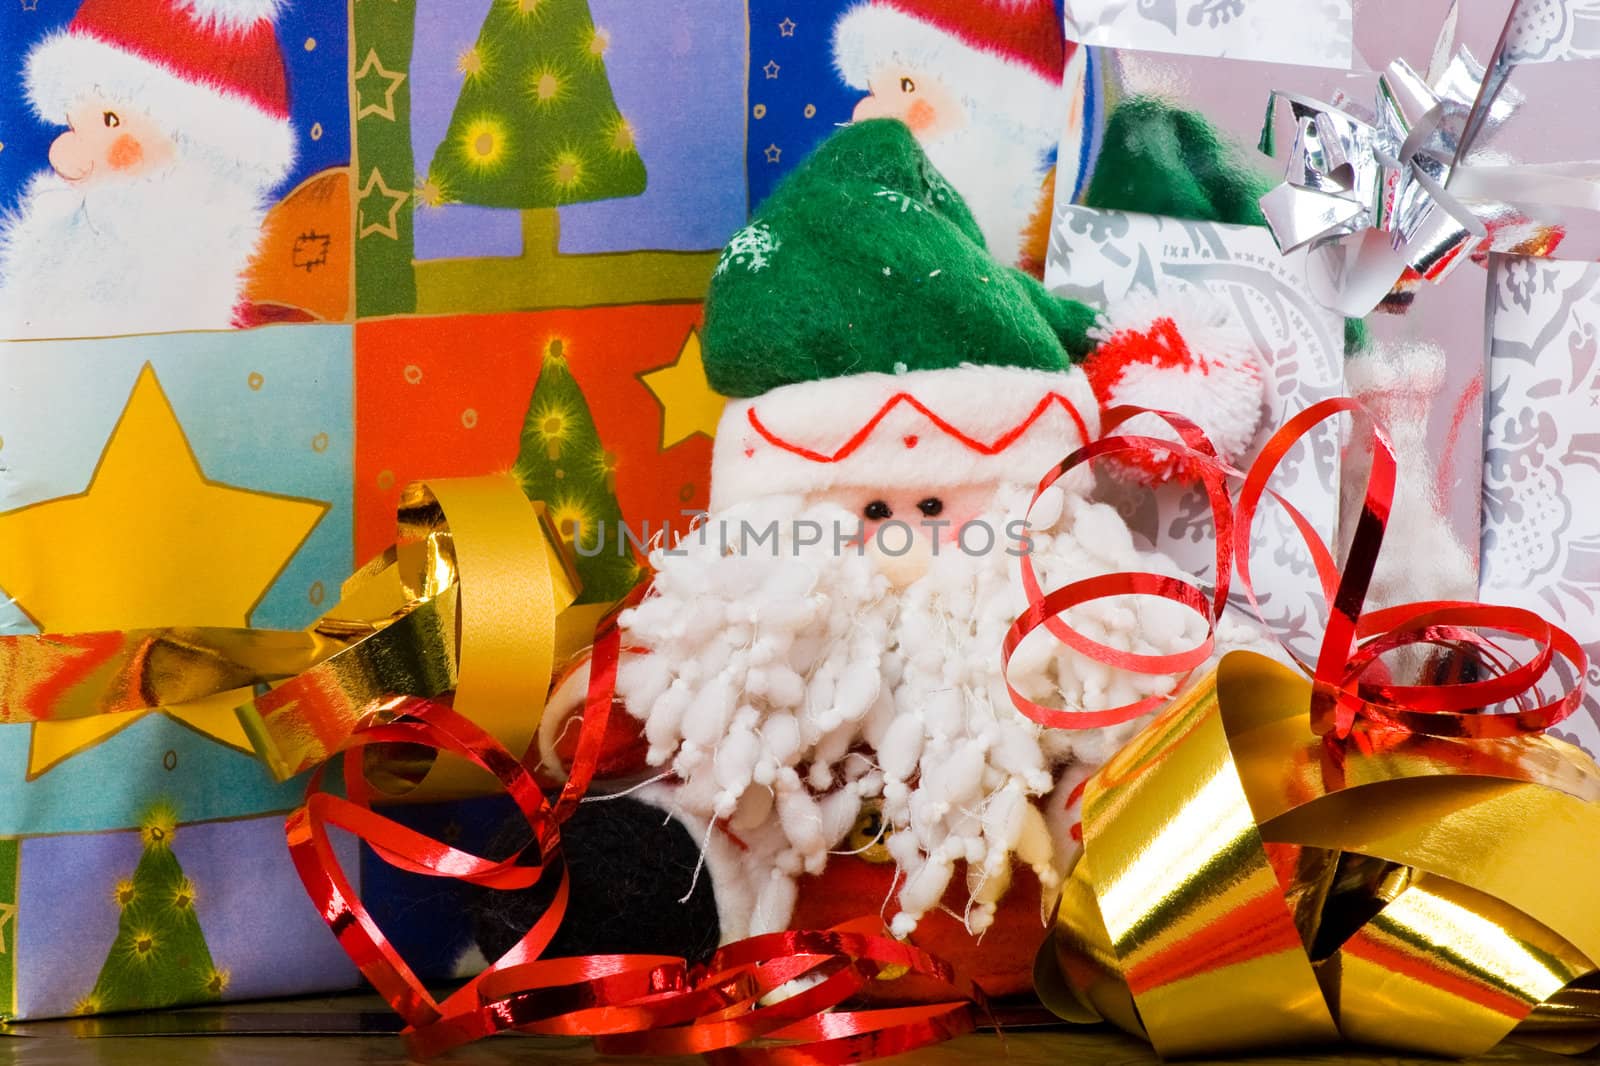 Santa puppet and decorated gift boxes with ribbons